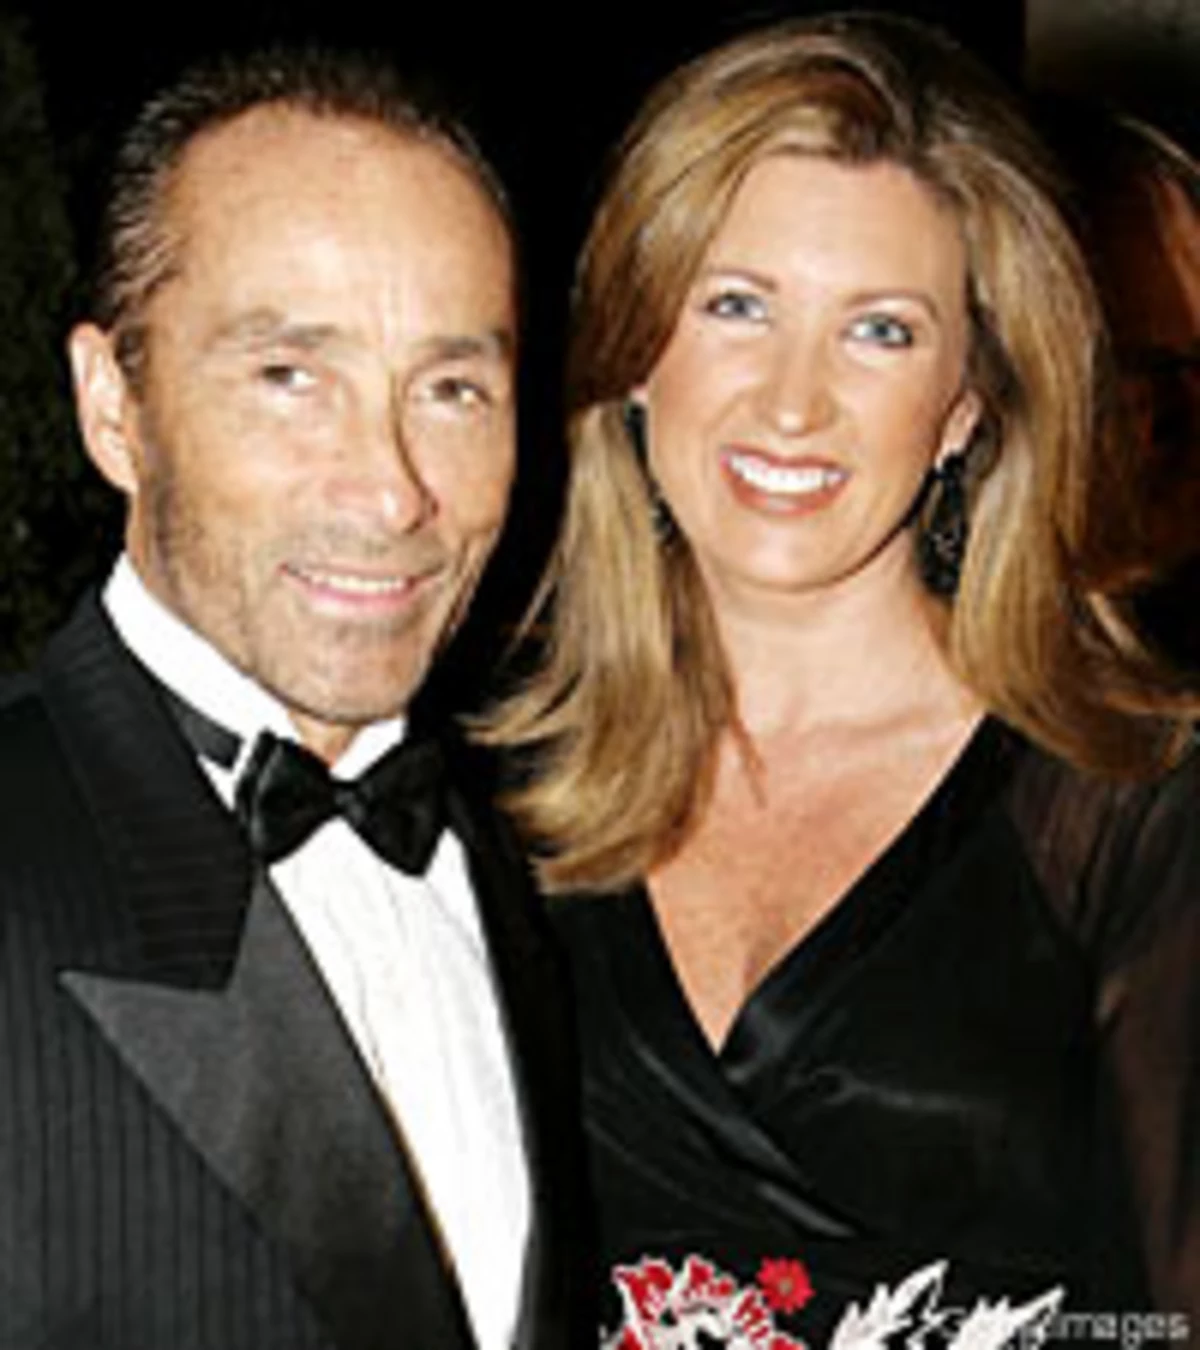 Lee Greenwood on Why the Fourth Time's the Charm